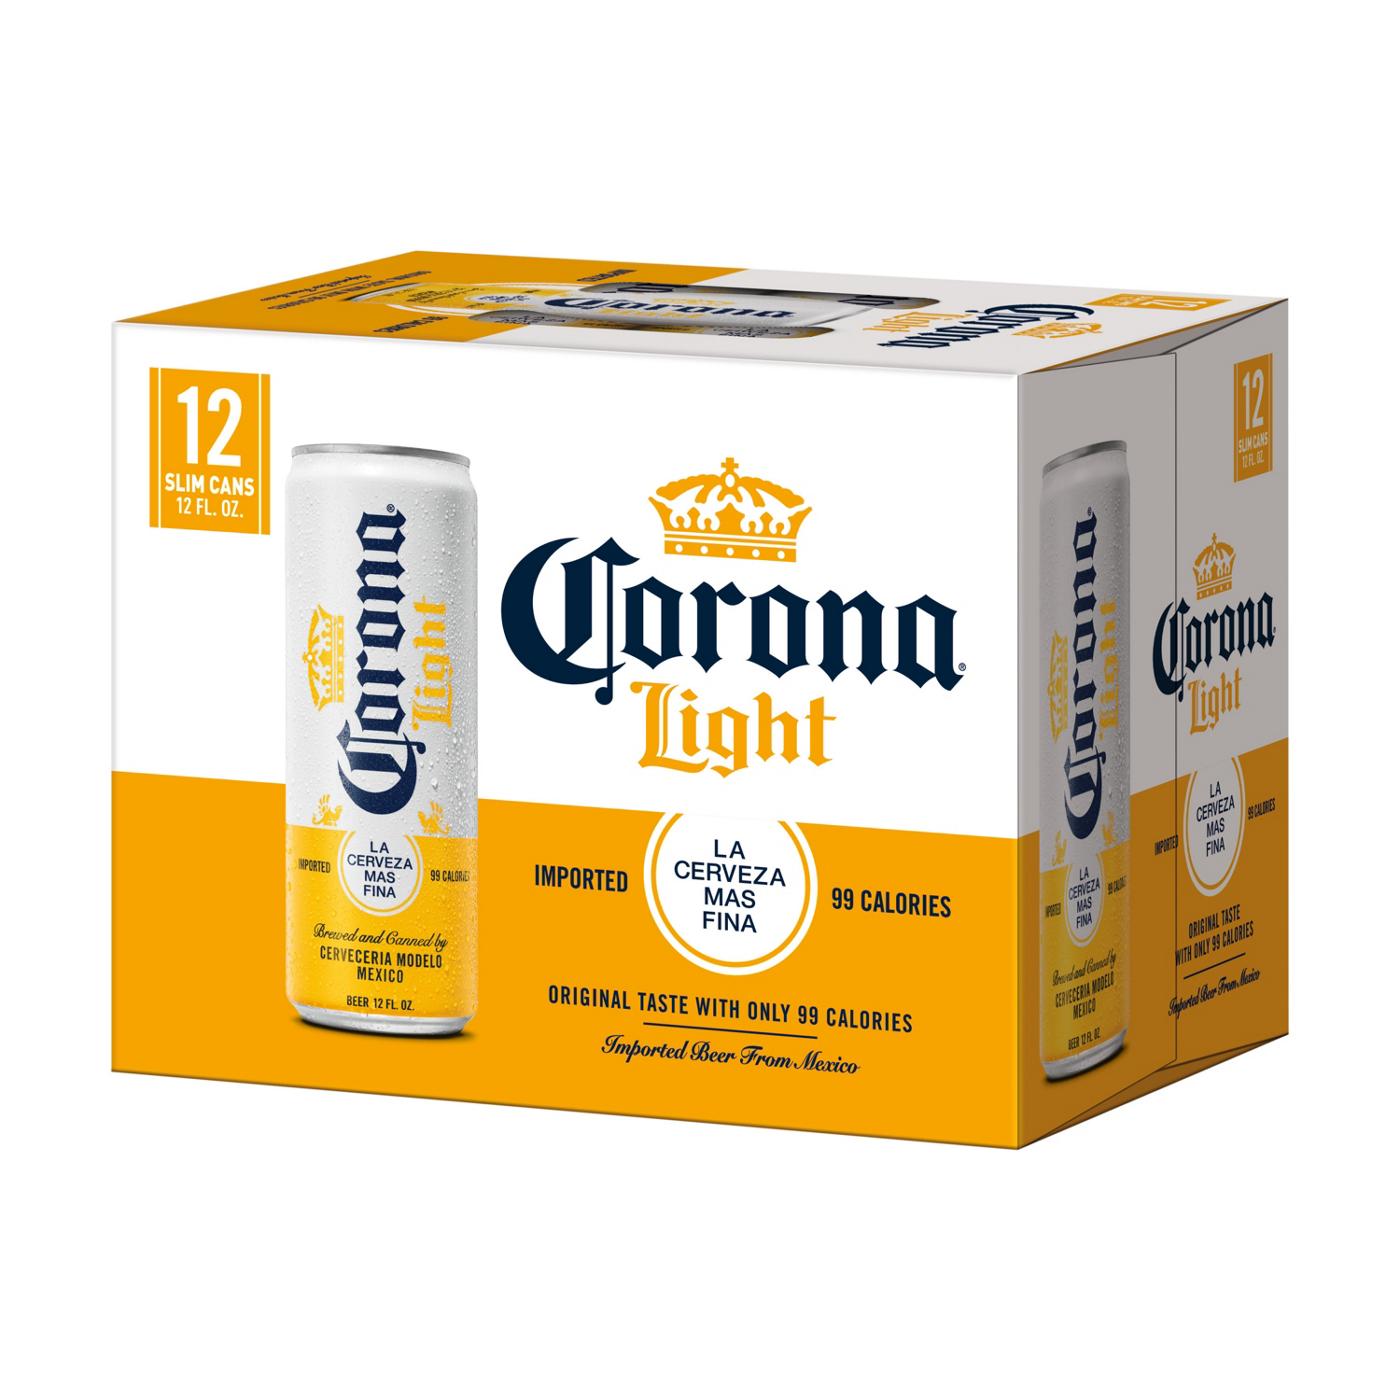 Corona Light Mexican Lager Import Light Beer 12 oz Cans, 12 pk; image 10 of 10